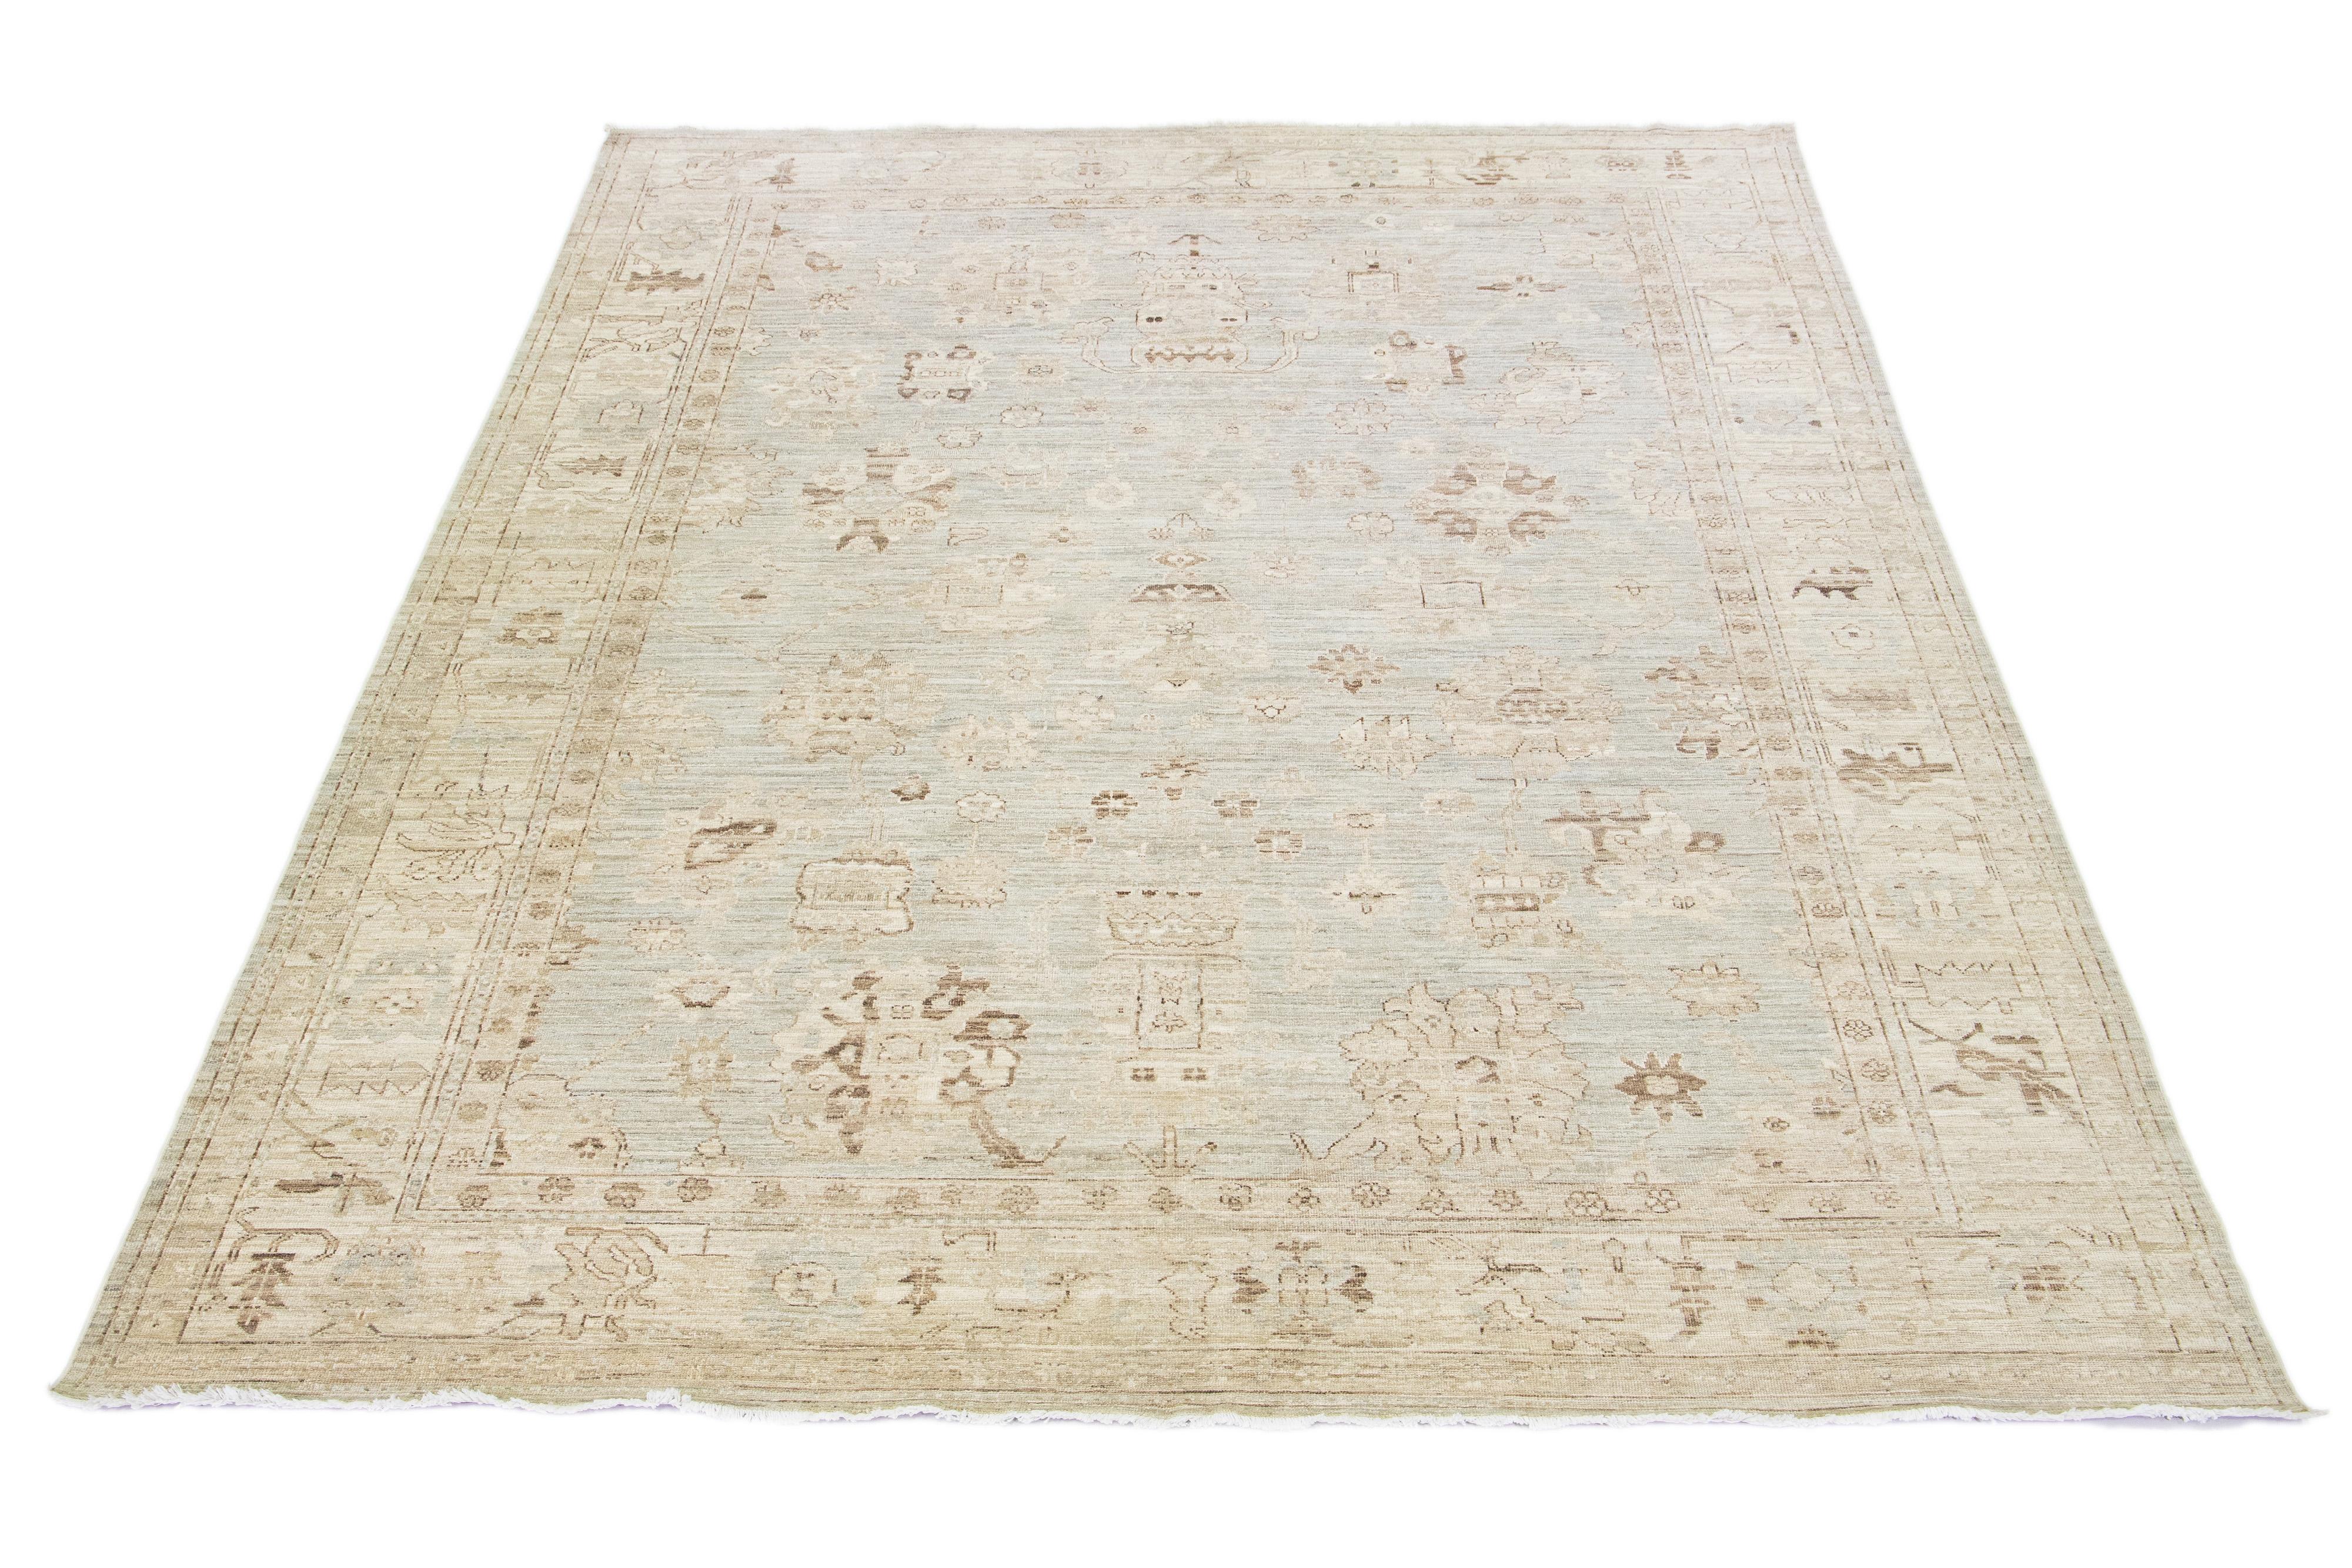 Beautiful modern Oushak hand-knotted wool rug with a gray color field. This Piece has beige and brown accent colors in a gorgeous all-over floral design.

This rug measures: 9'10